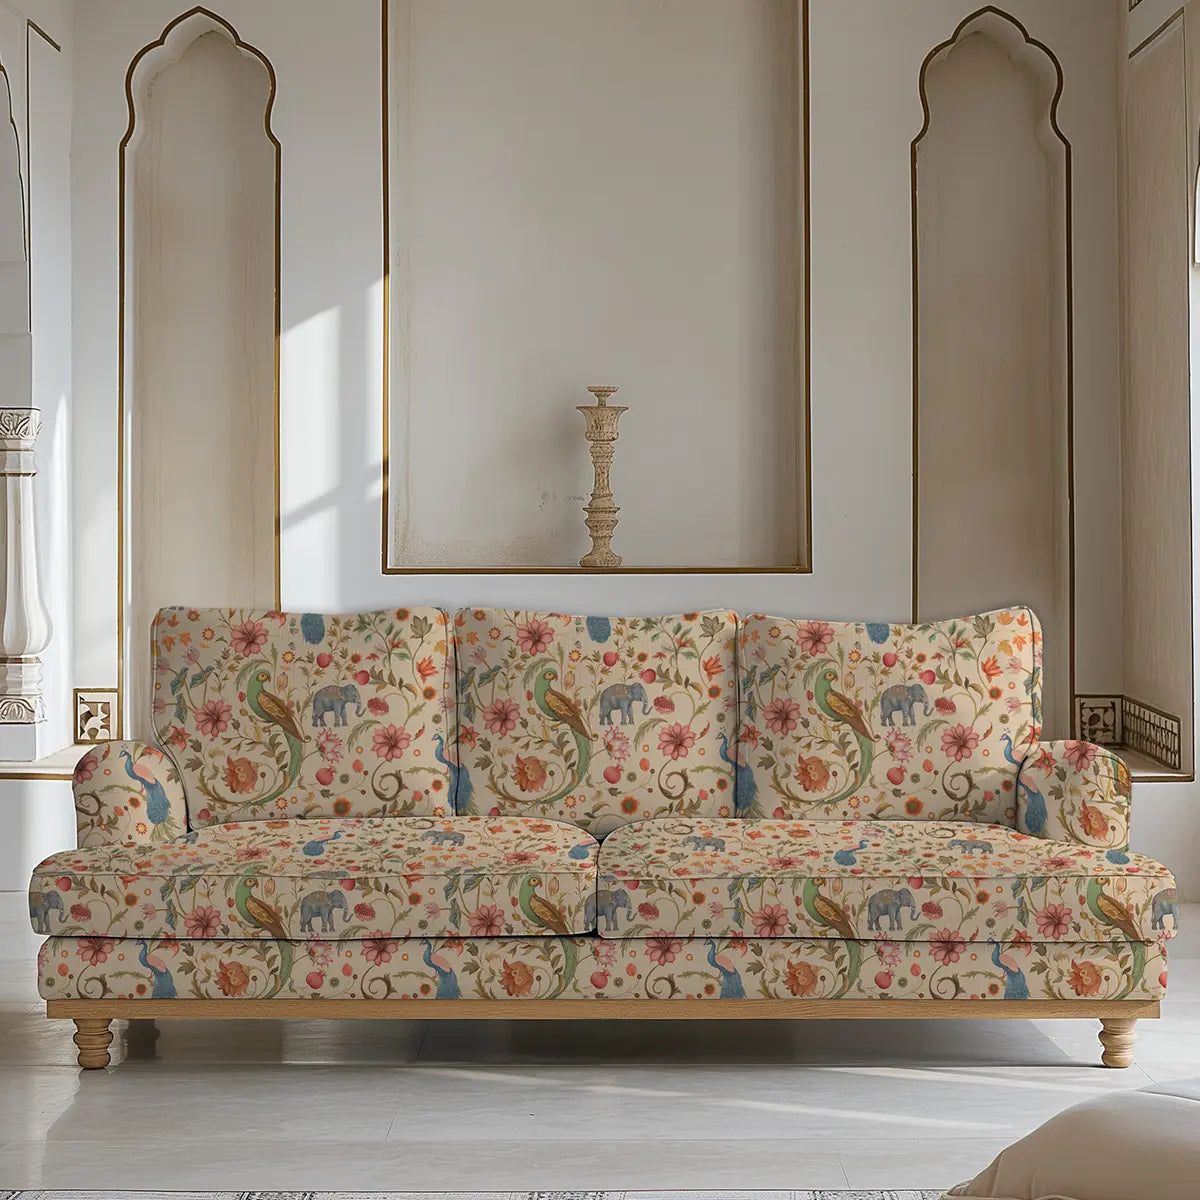 Shop now Sanjhi Indian Sofa and Chairs Upholstery Fabric Cream Buy Now